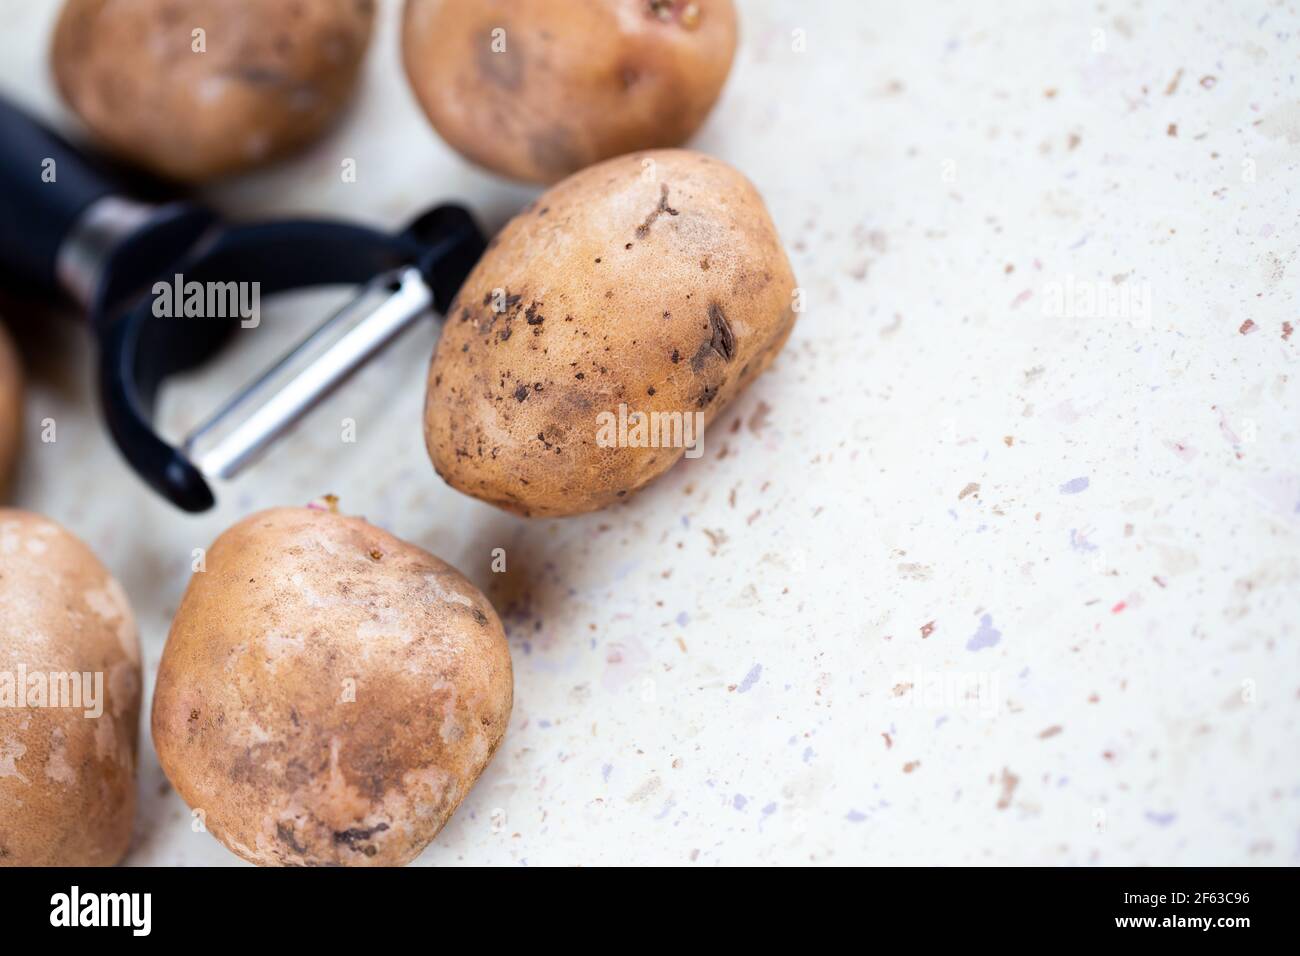 https://c8.alamy.com/comp/2F63C96/several-organic-potatoes-and-a-potato-peeler-on-the-table-made-in-natural-light-soft-shadows-2F63C96.jpg